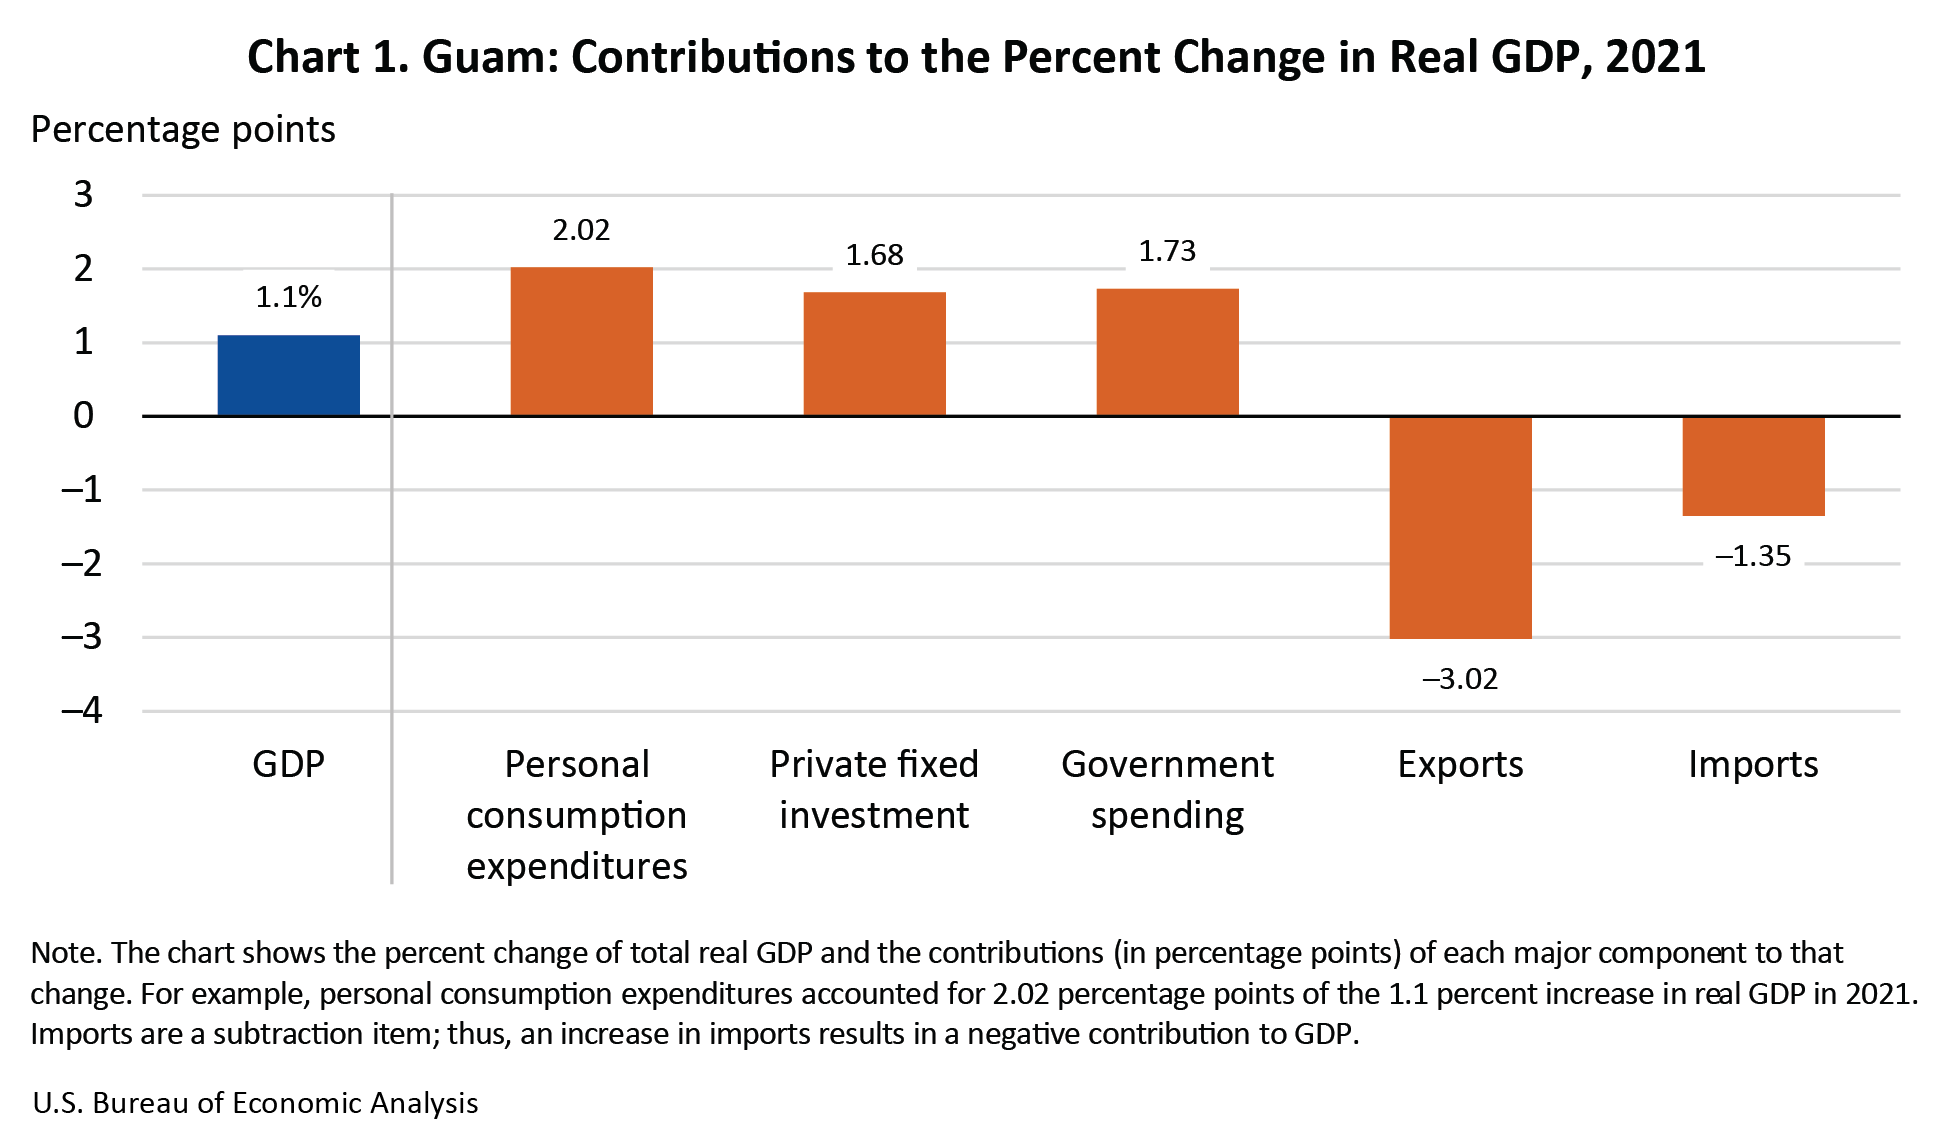 Guam: Contributions to the Percent Change in Real GDP, 2021